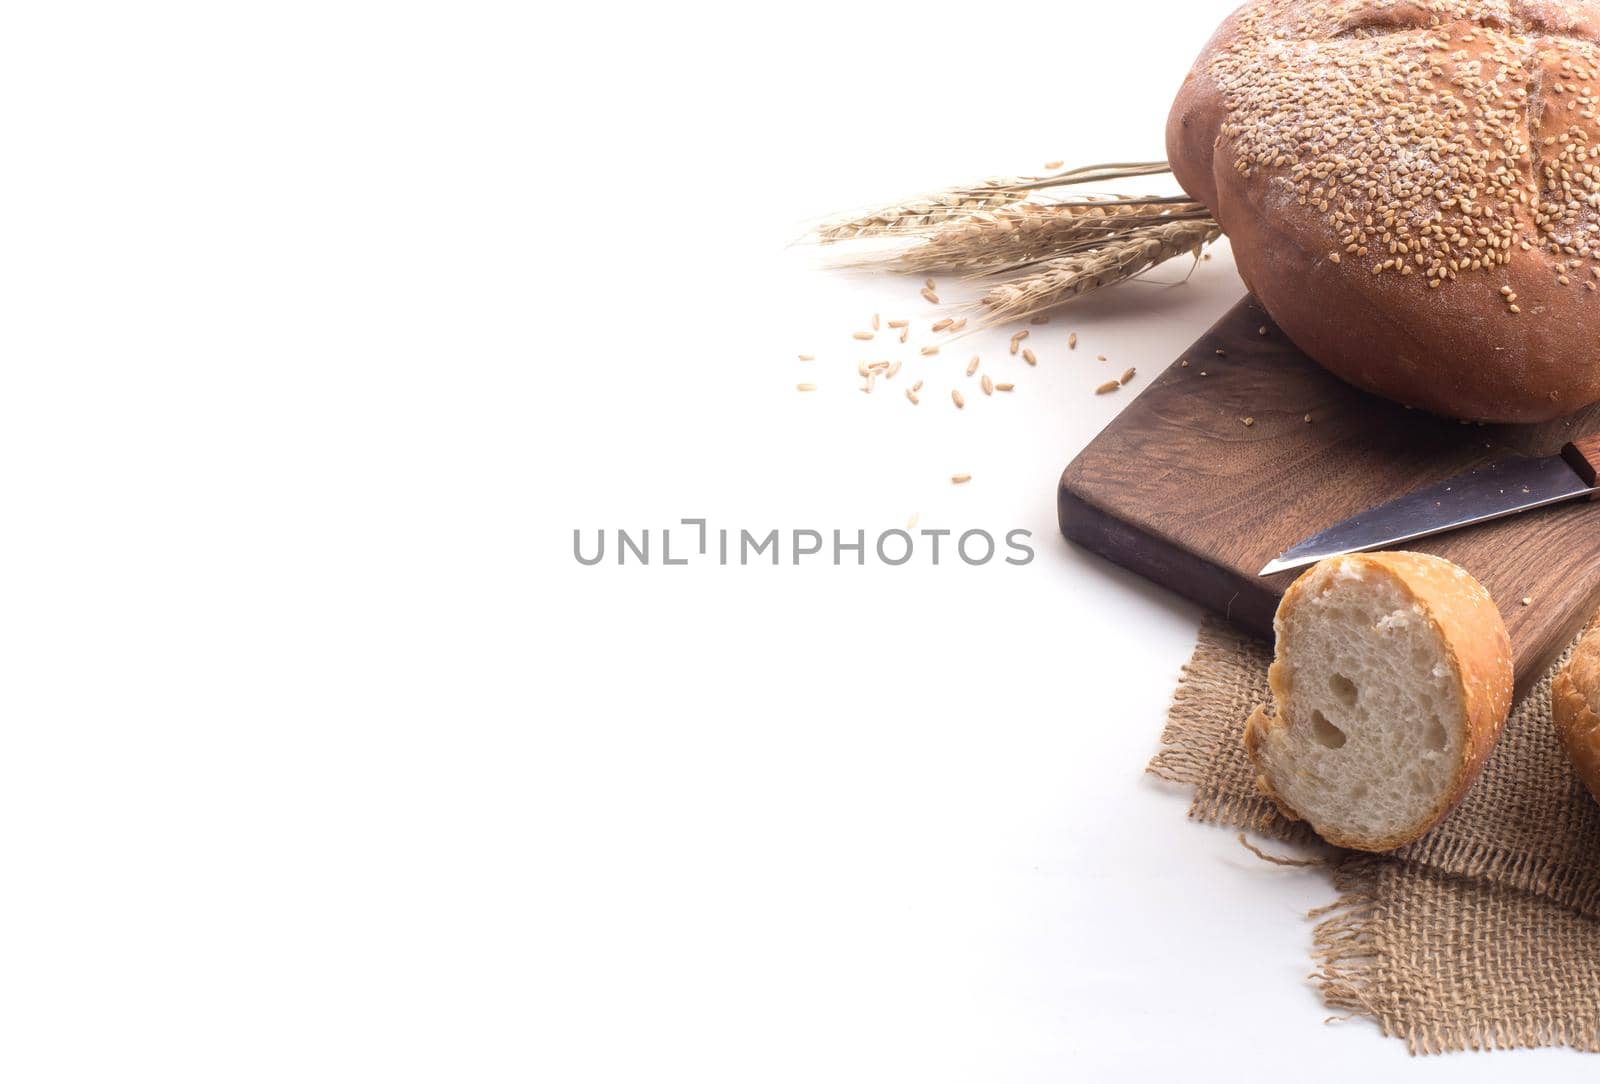 Black coffee and whole wheat bread for breakfast on white background